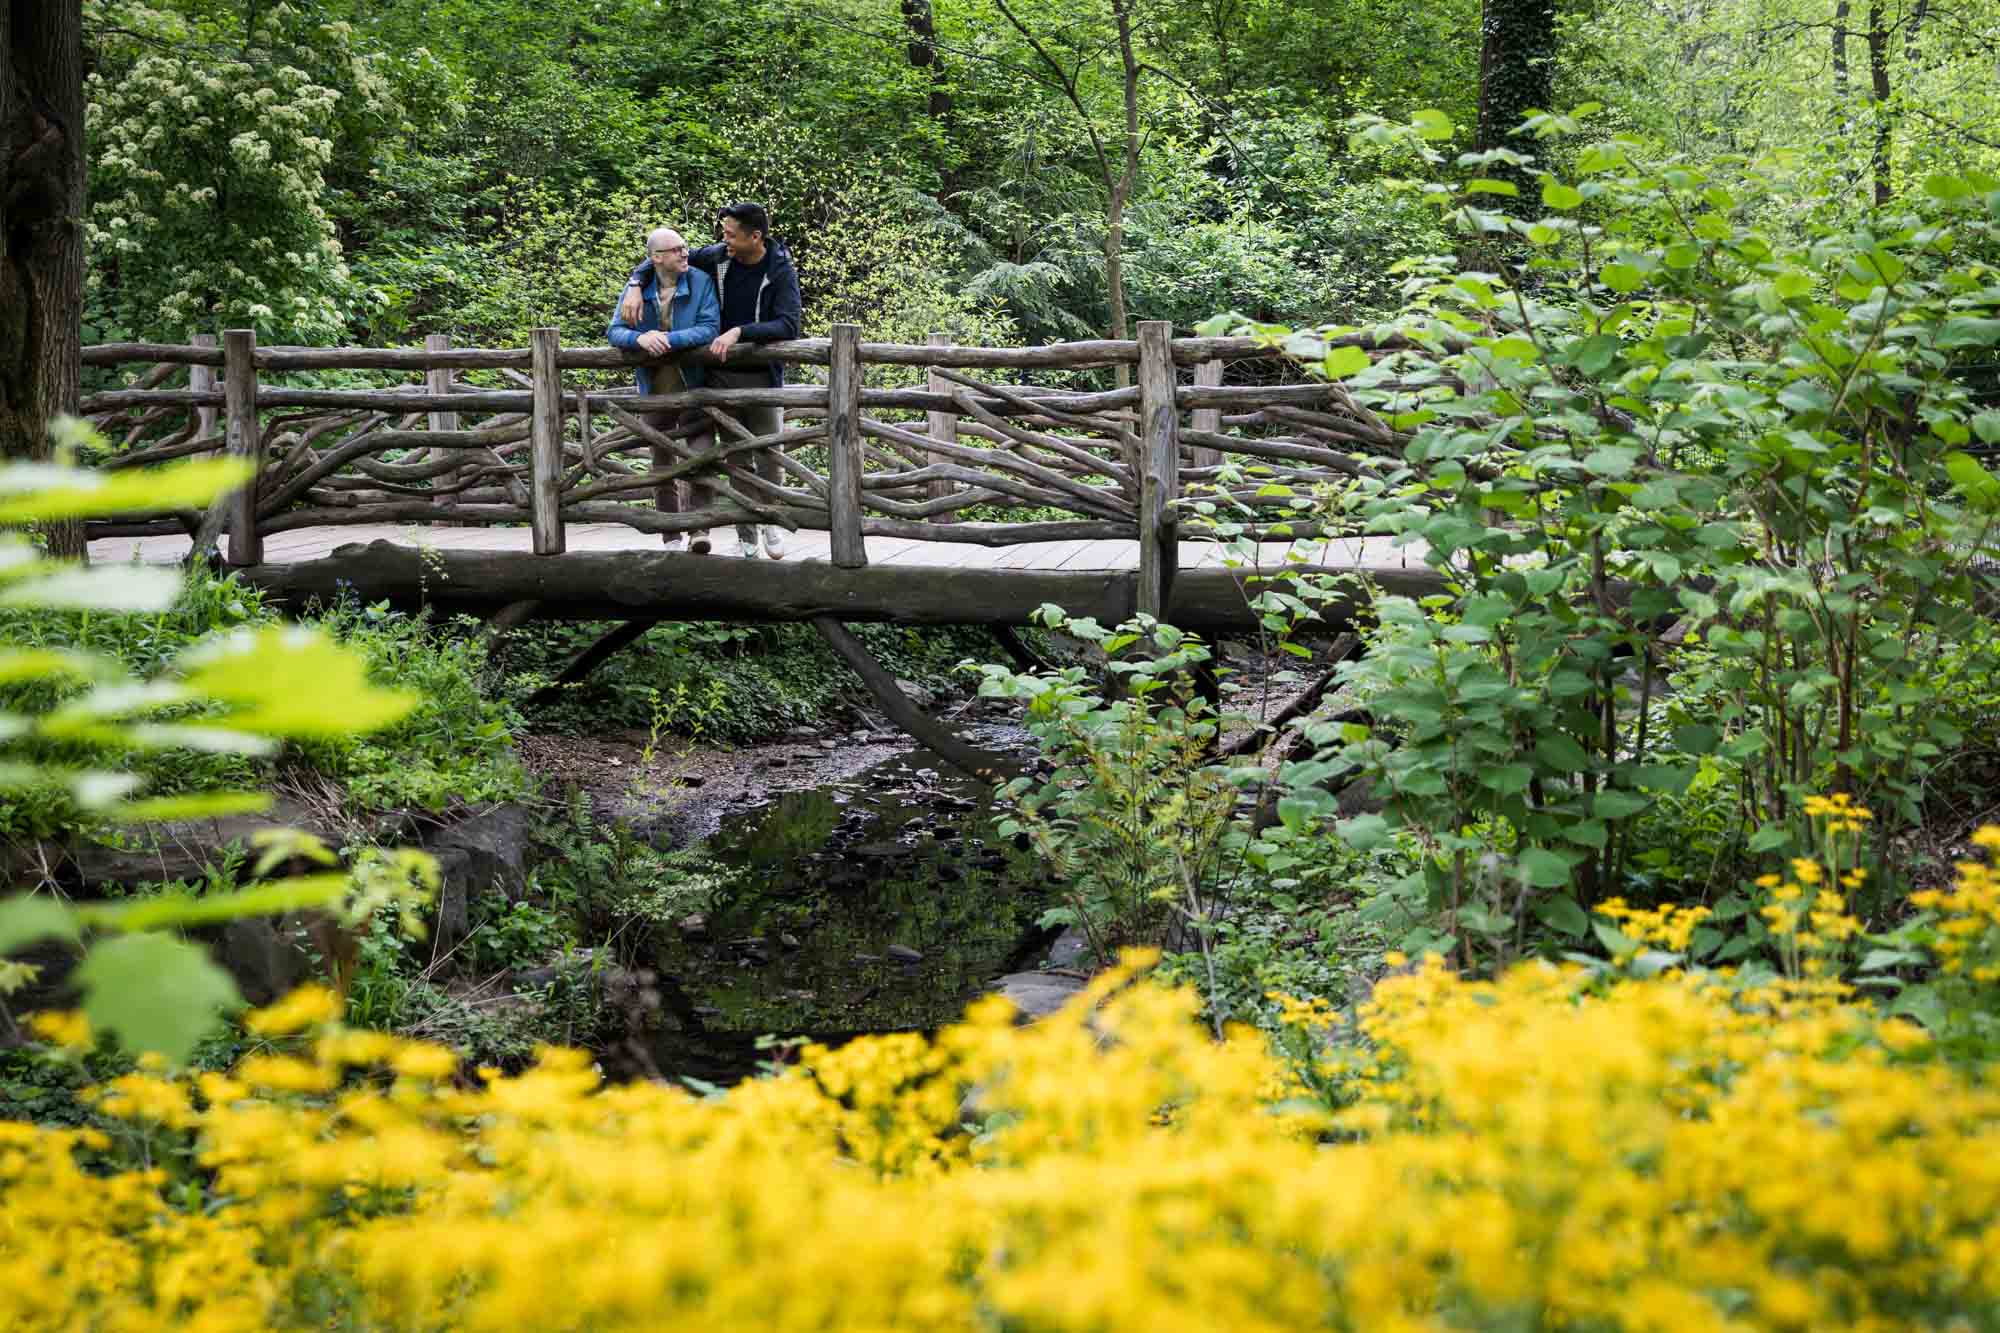 Two men standing on a wooden bridge with yellow flowers in the foreground from a Central Park engagement photo shoot